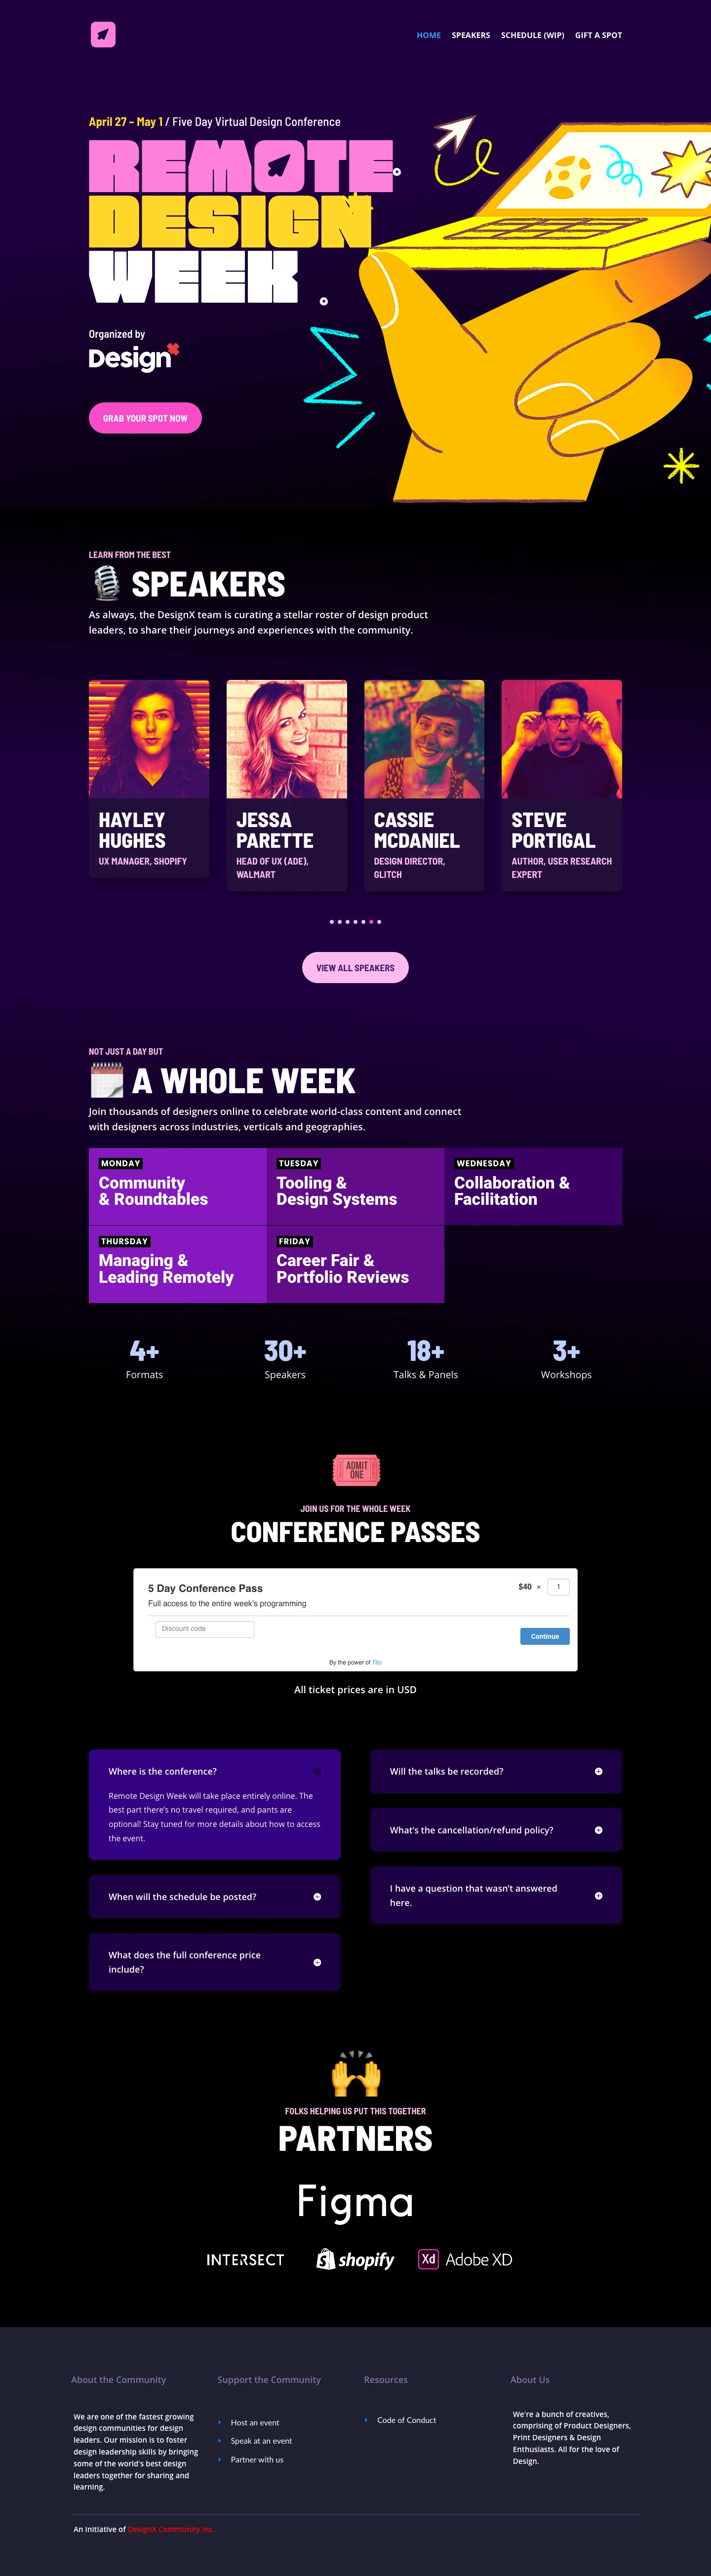 Remote Design Week Landing Page Example: A five day virtual design conference bringing thousands of designers together remotely to celebrate world-class content and connect with designers across industries, verticals and geographies.